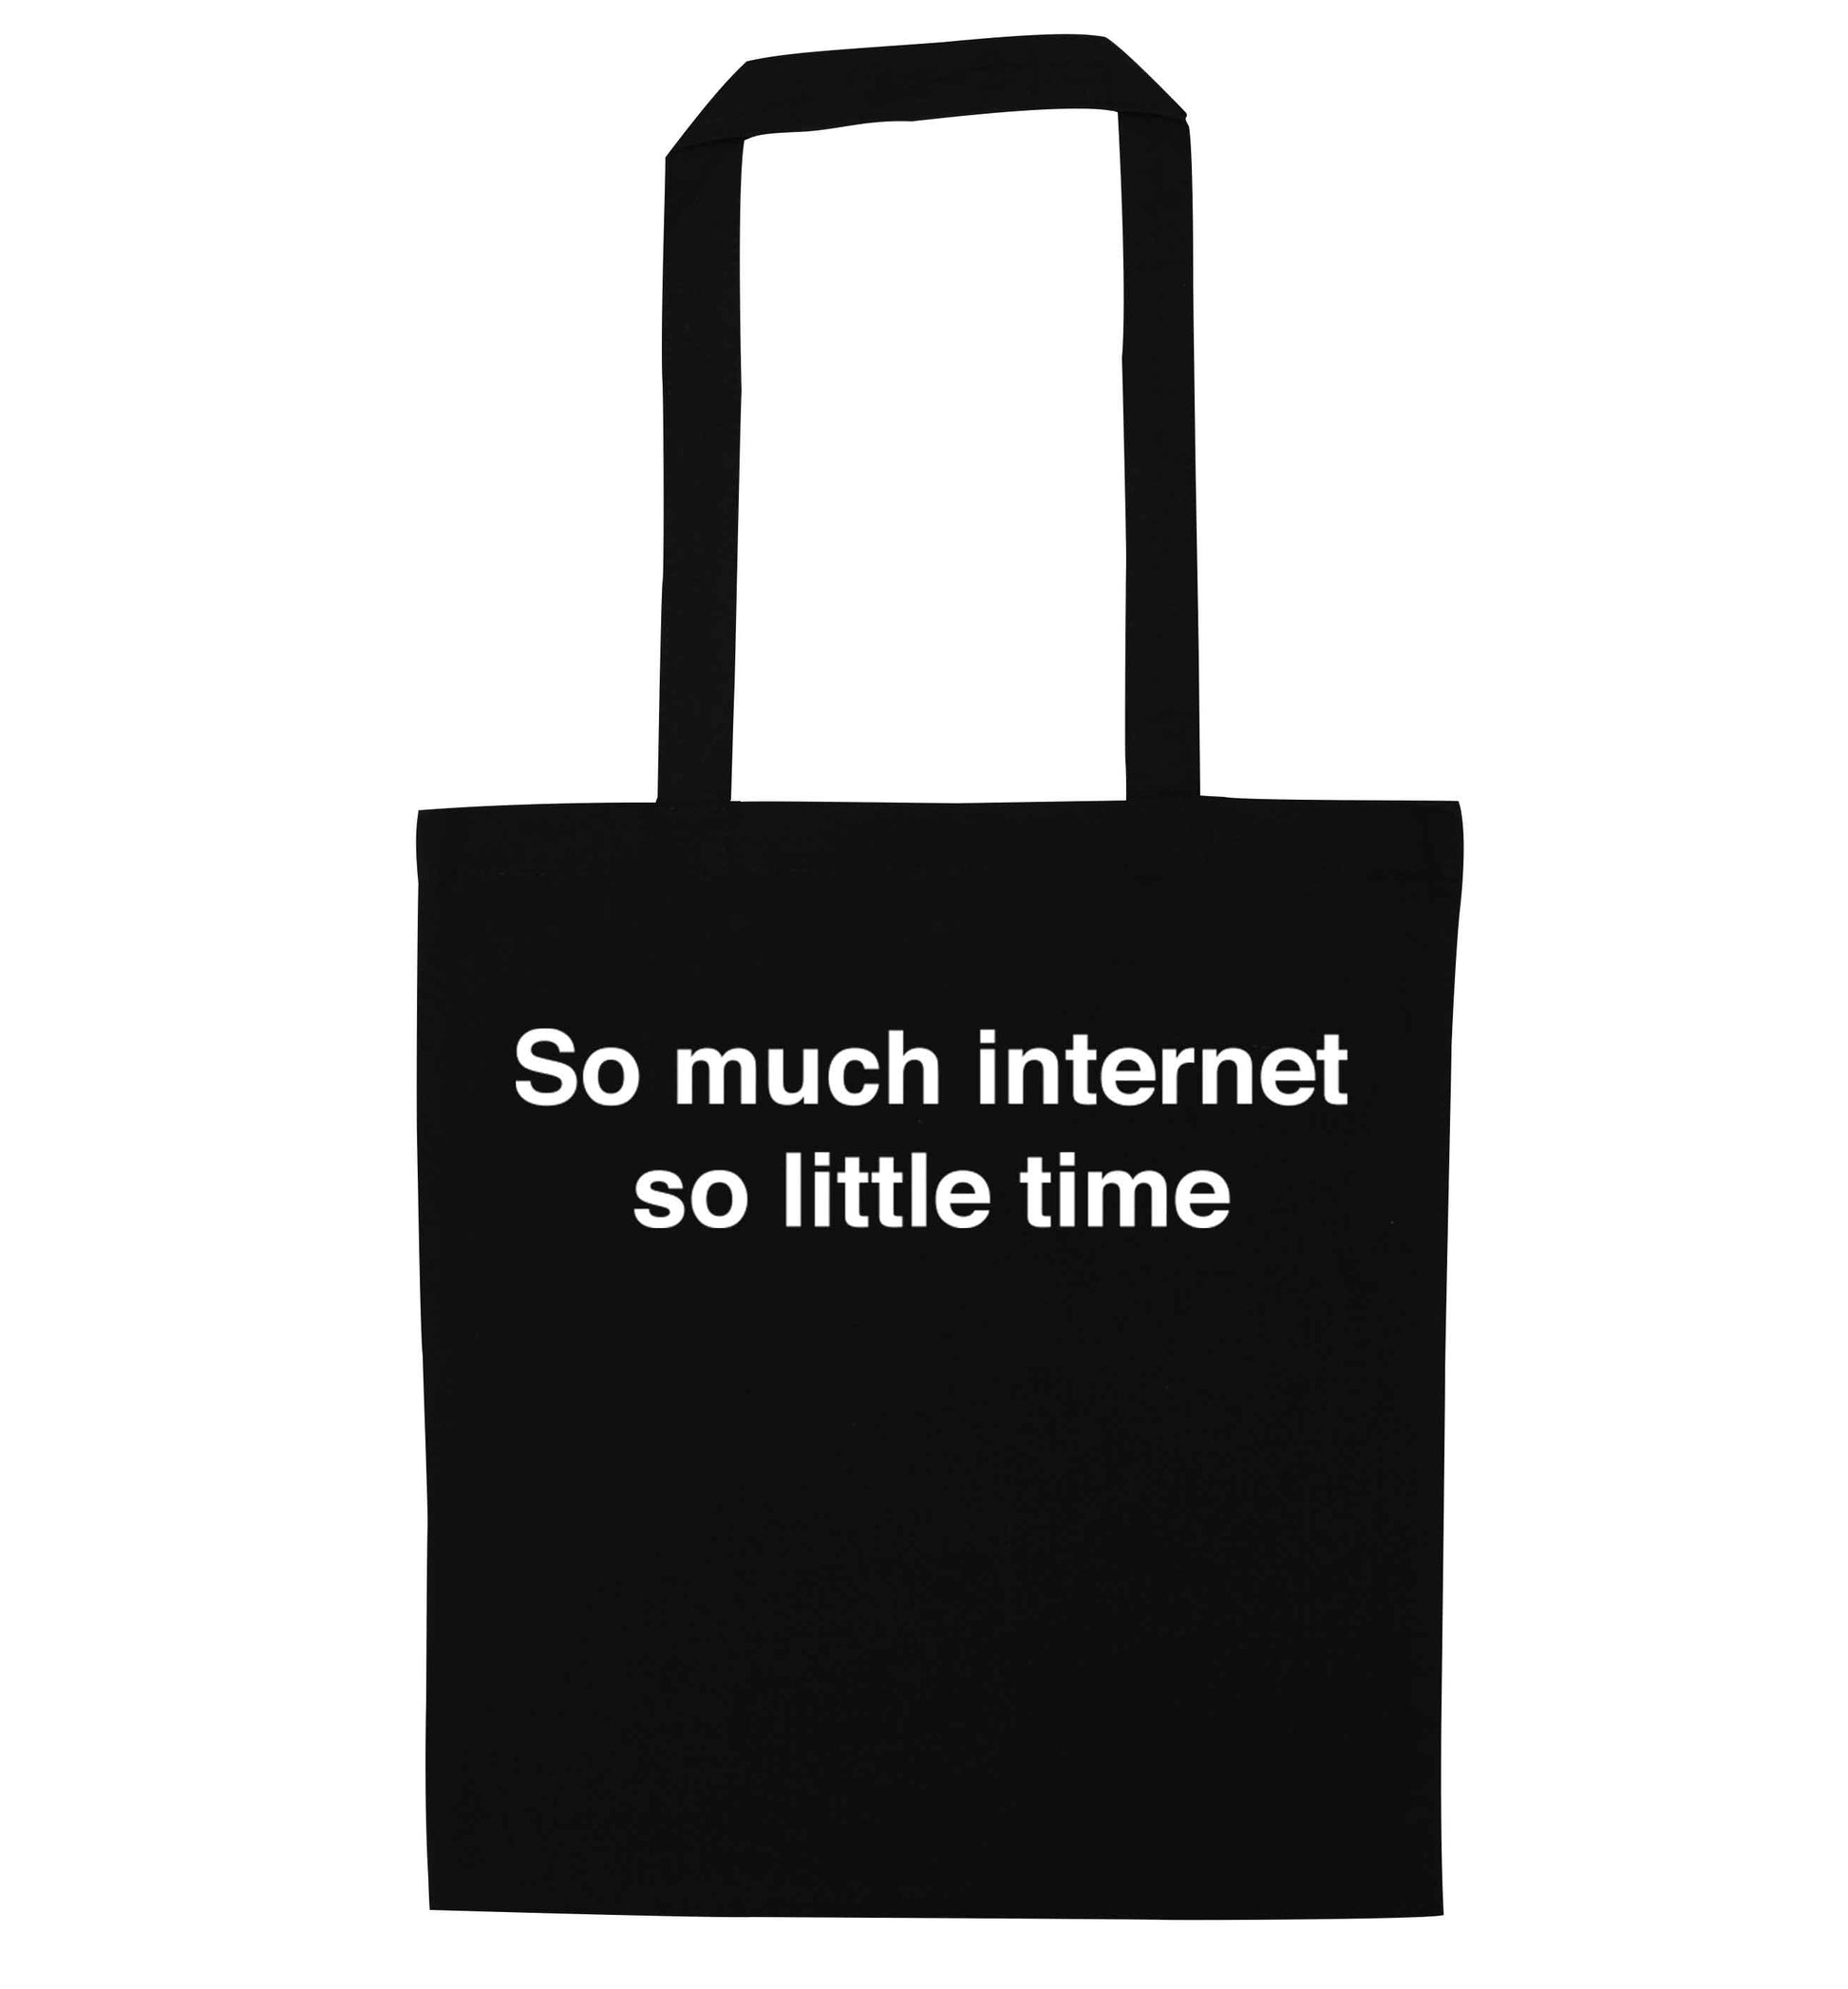 So much internet so little time black tote bag